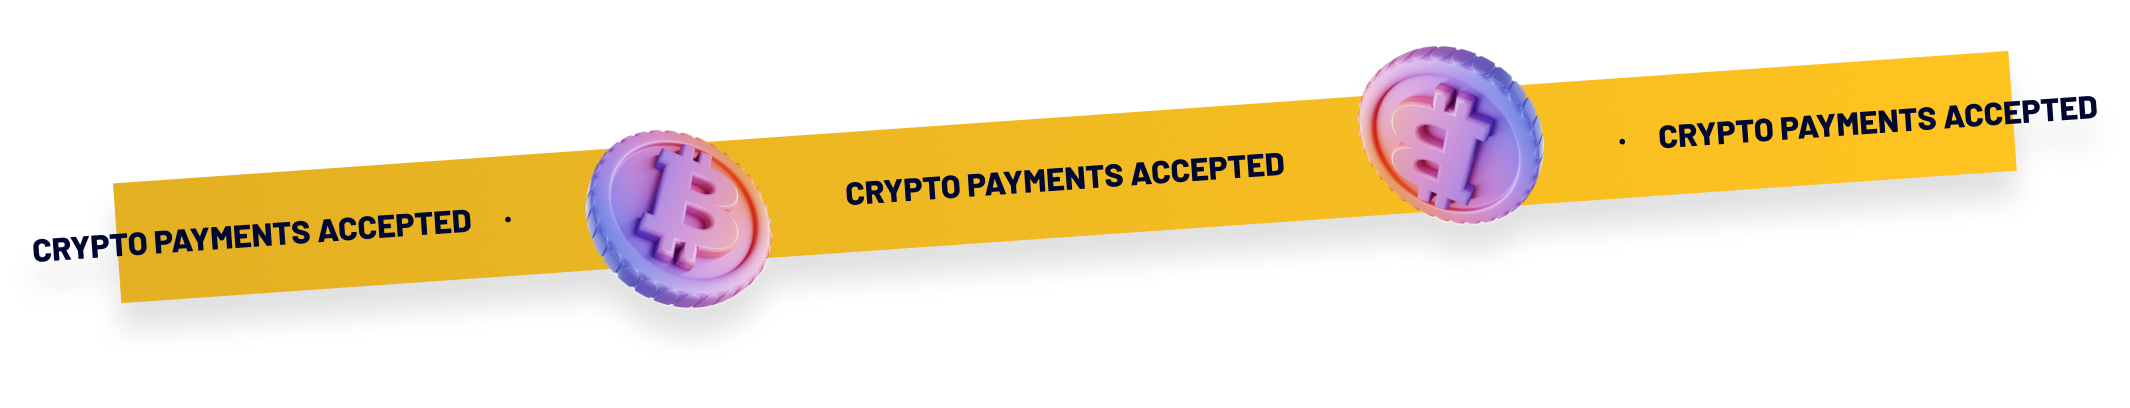 Crypto Payments Accepted Strip